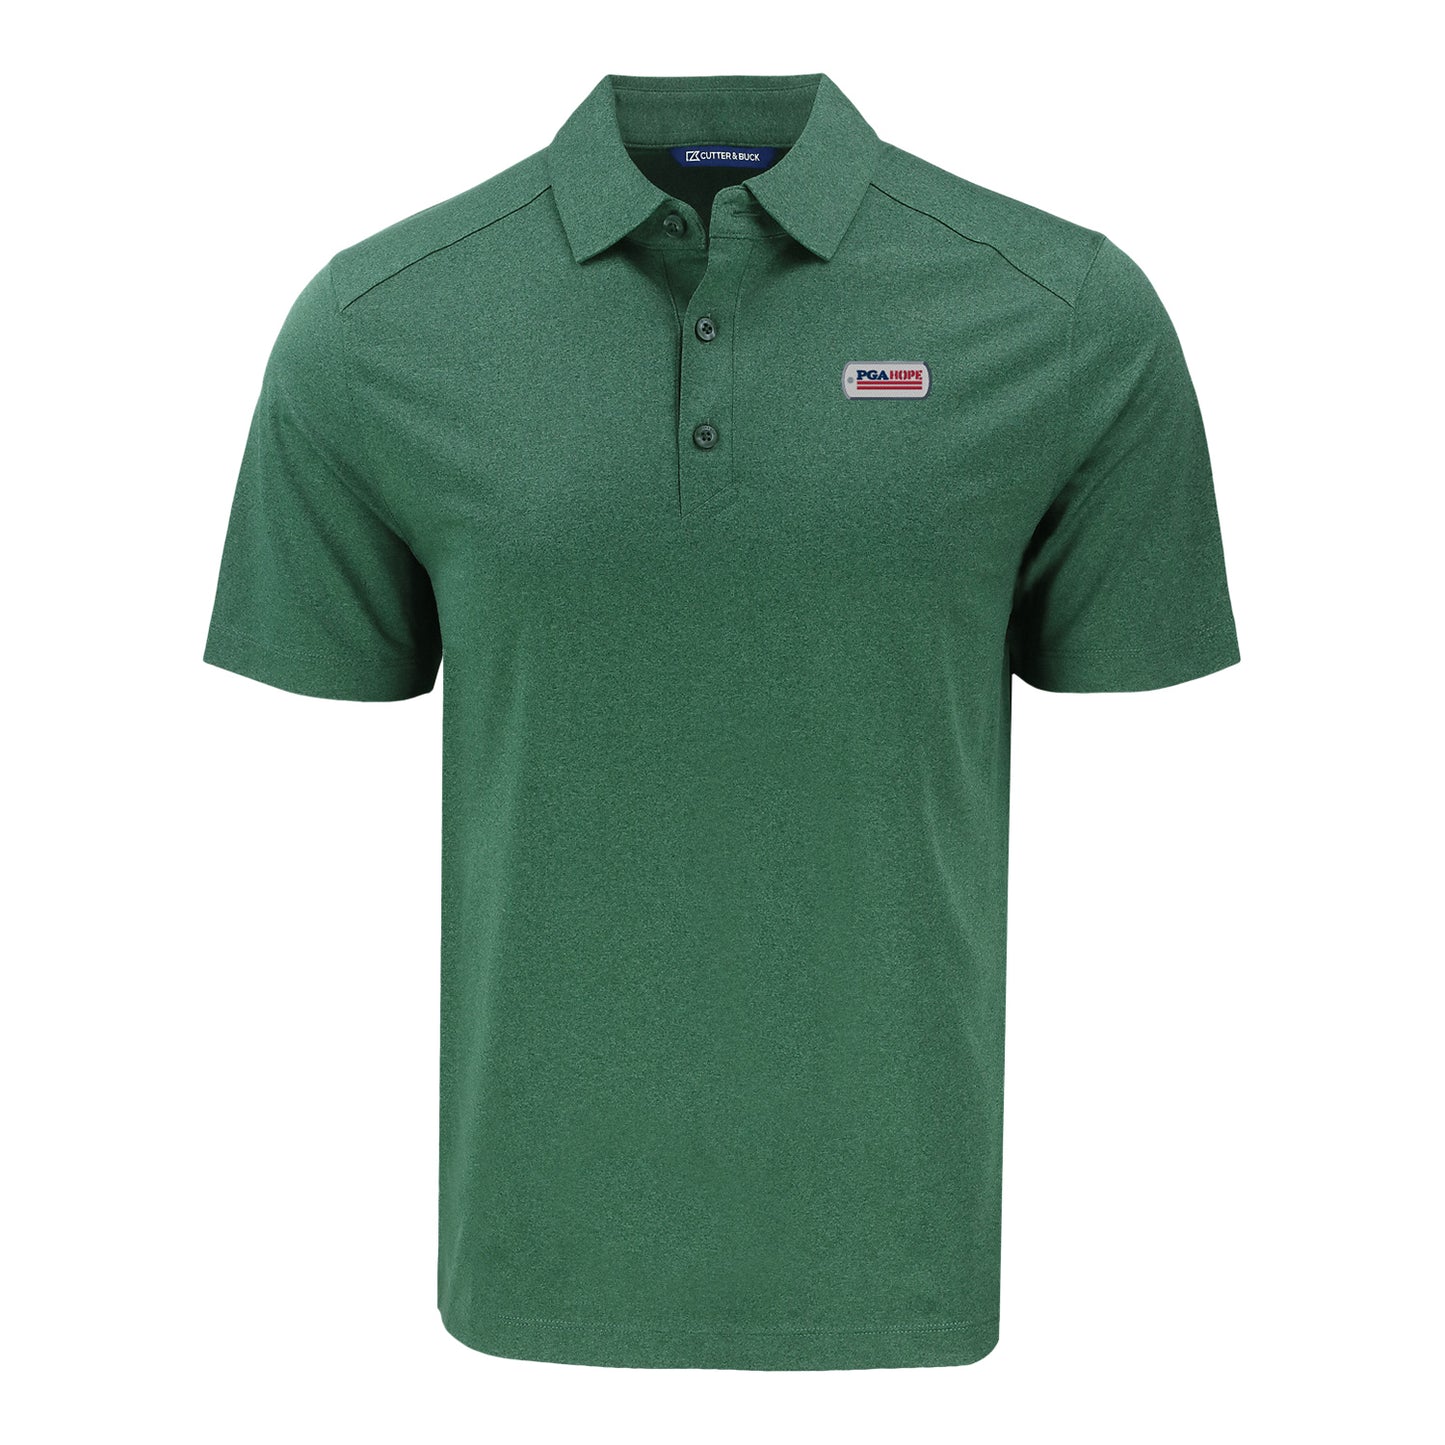 Cutter & Buck PGA HOPE Heathered Forge Polo in Hunter Green - Front View